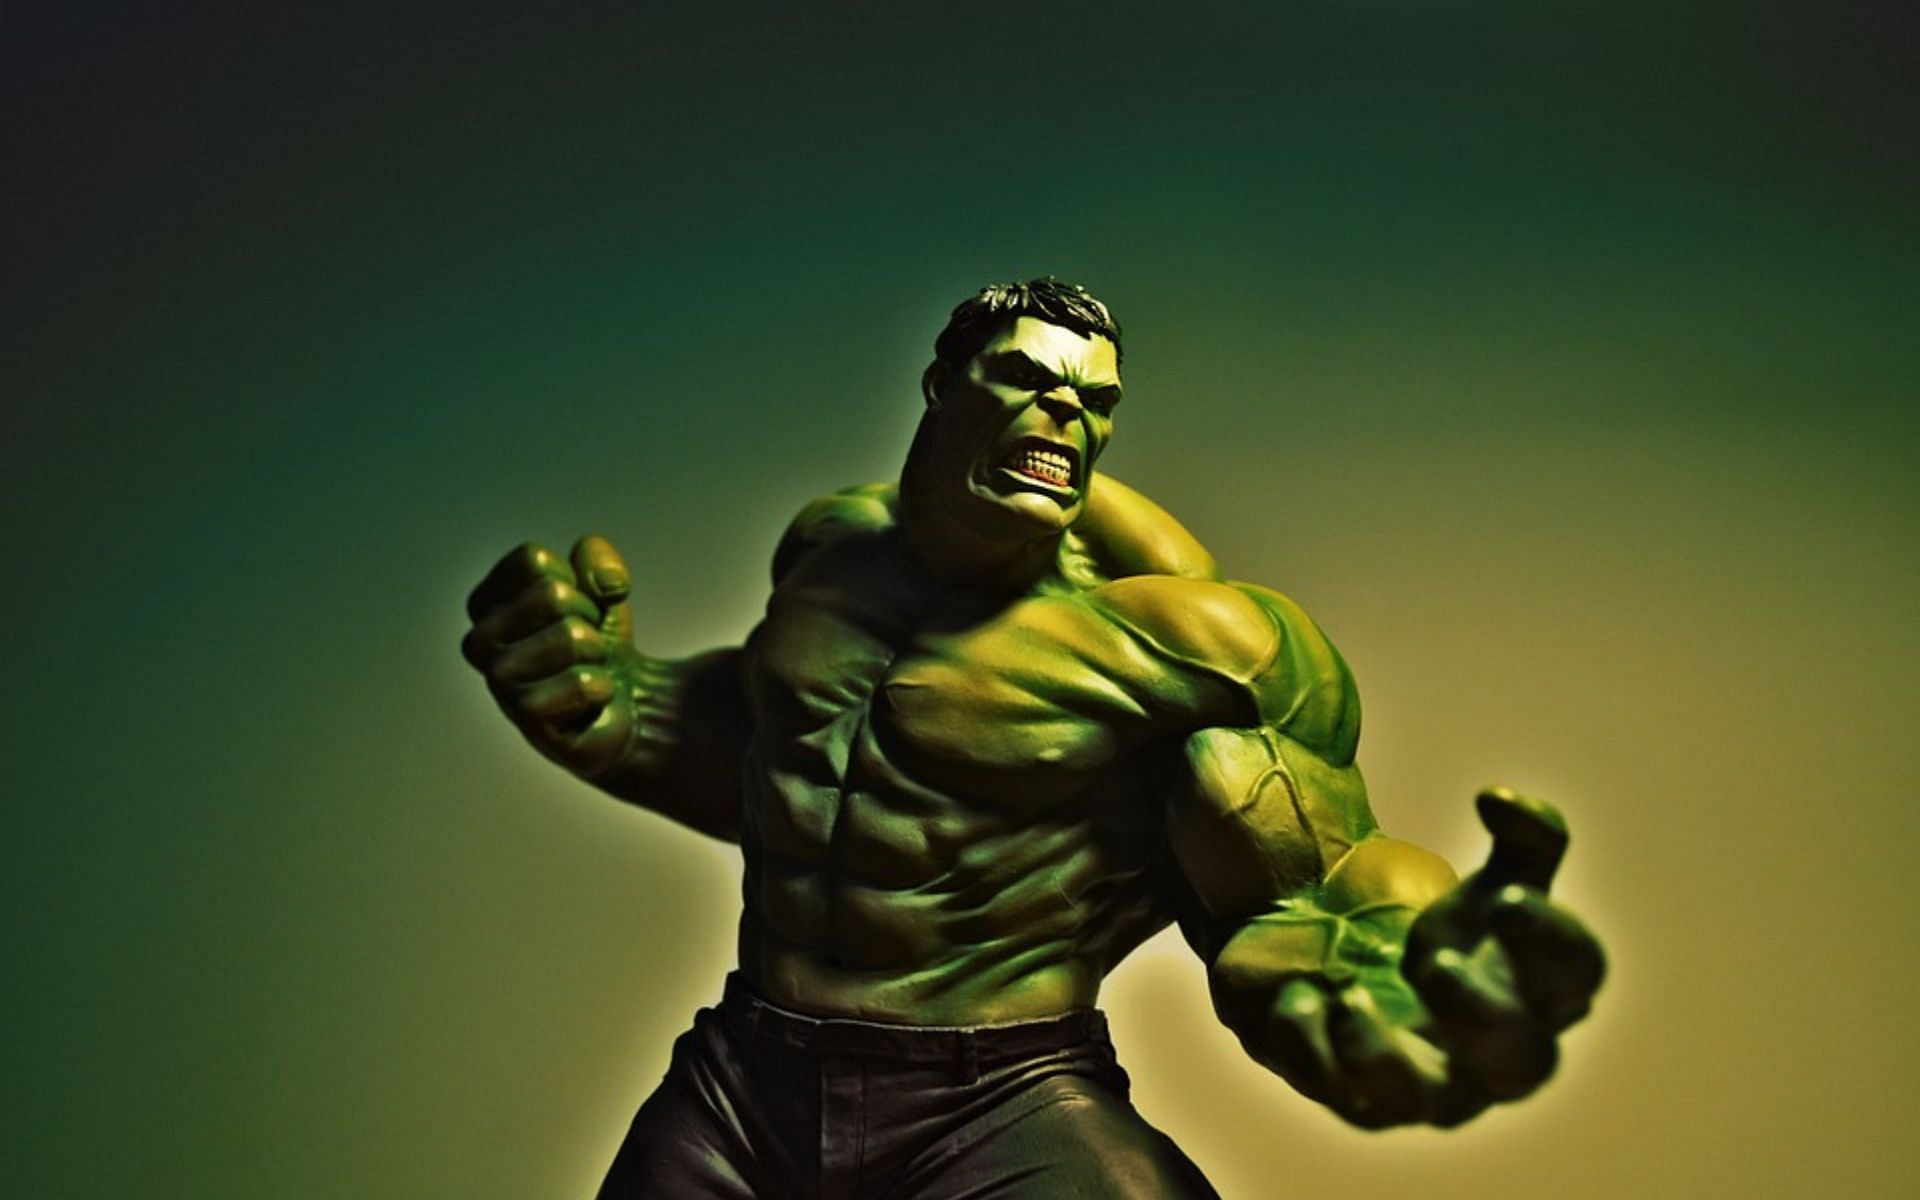 Bruce Banner in his angry avatar (Image via Pixabay)